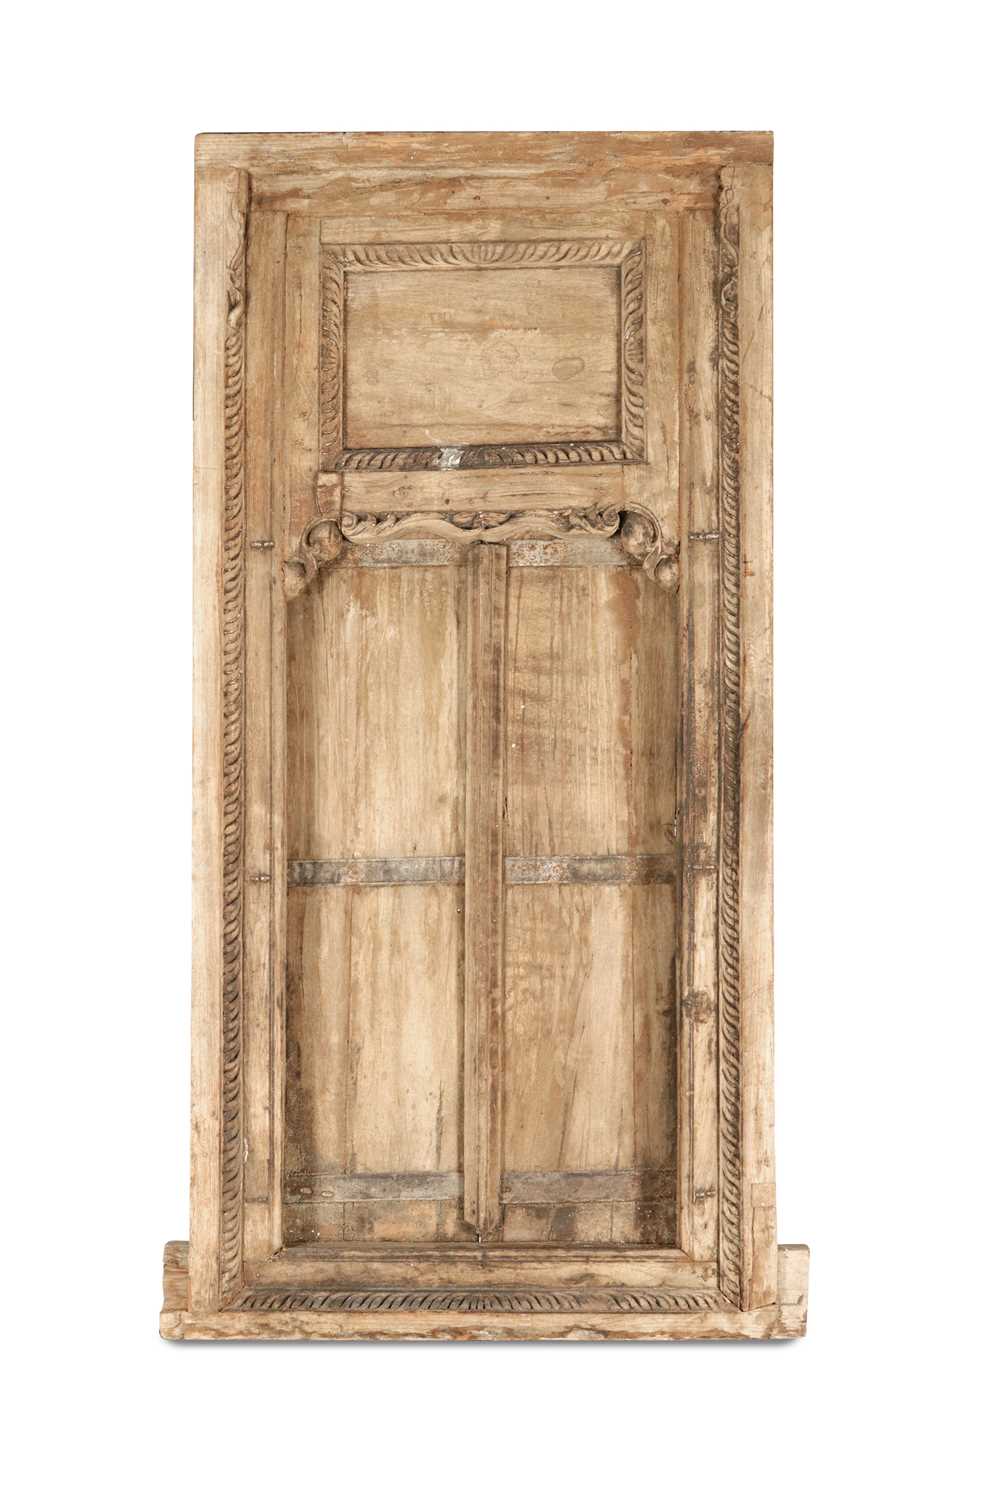 Lot 45 - Indian Carved Wooden Door with Frame